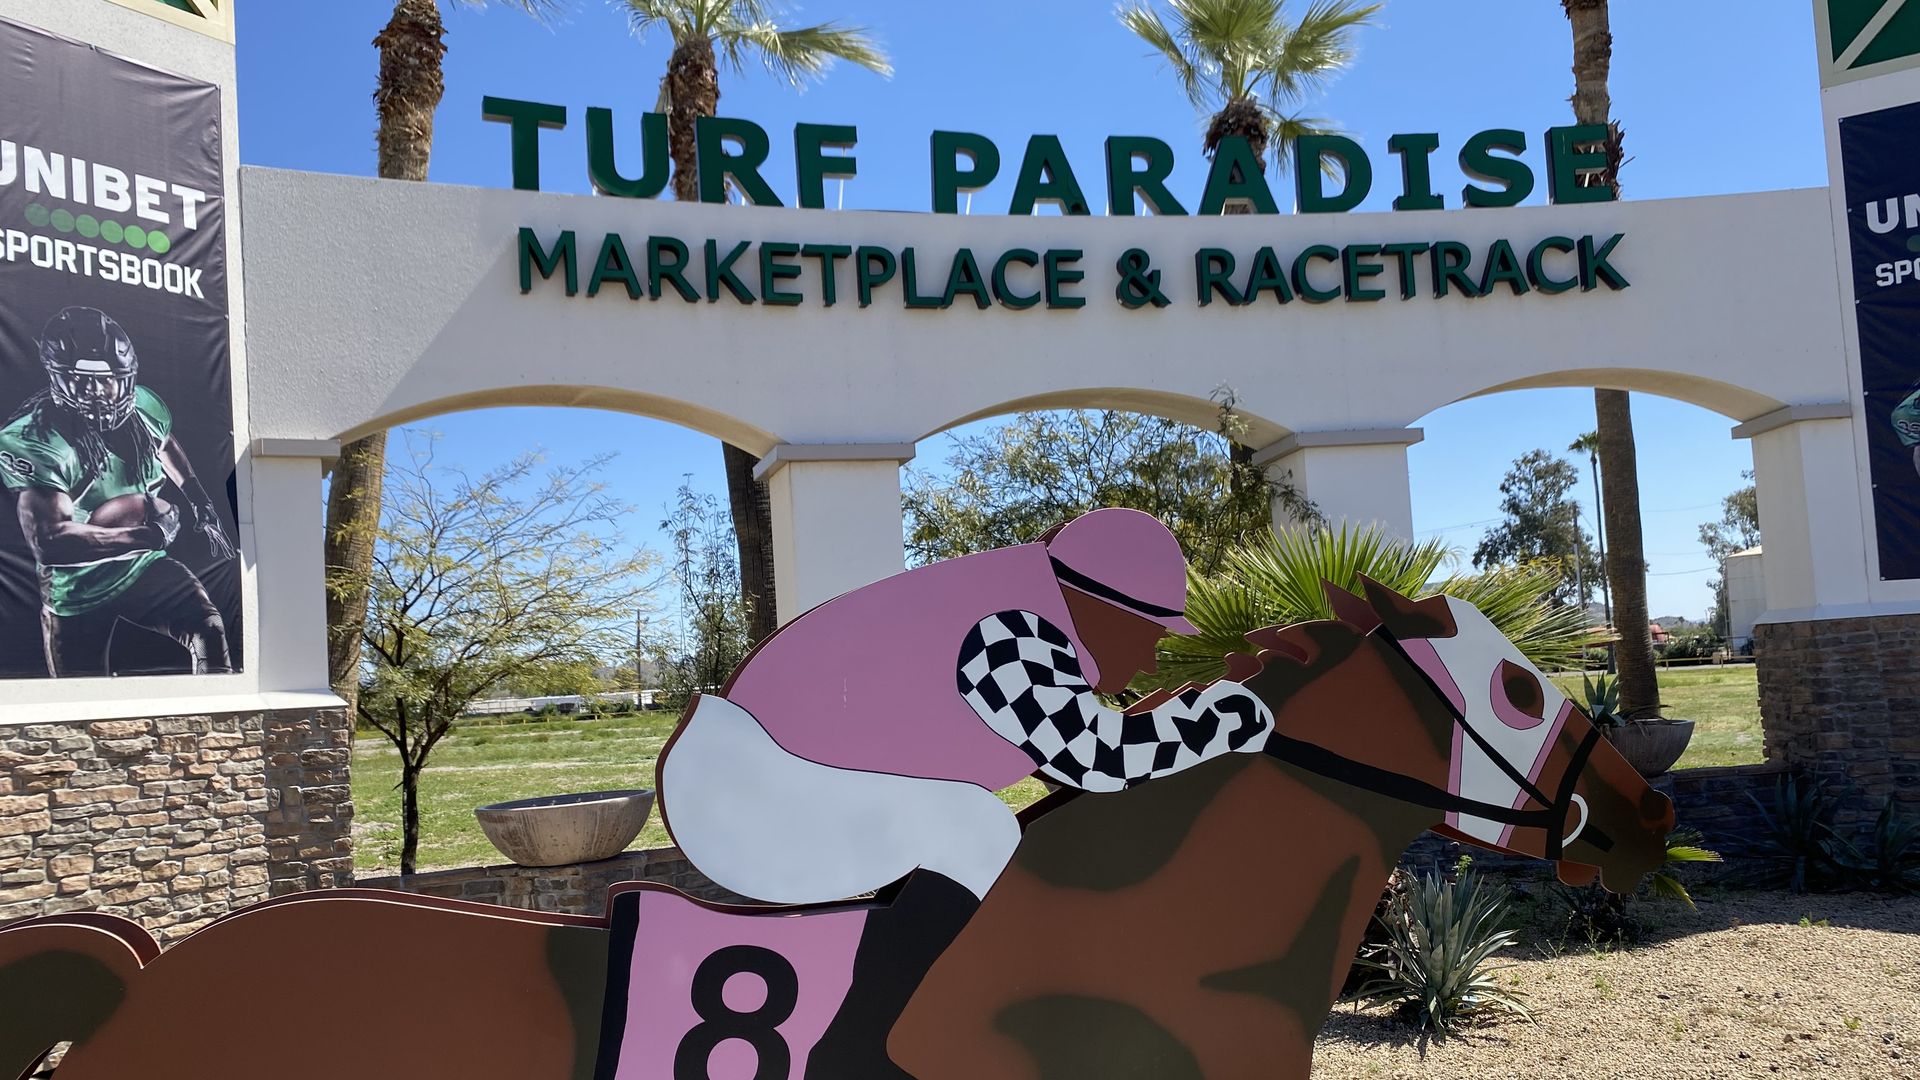 A cut-out figure of a jockey on a horse in front of a sign that reads Turf Paradise marketplace and racetrack.